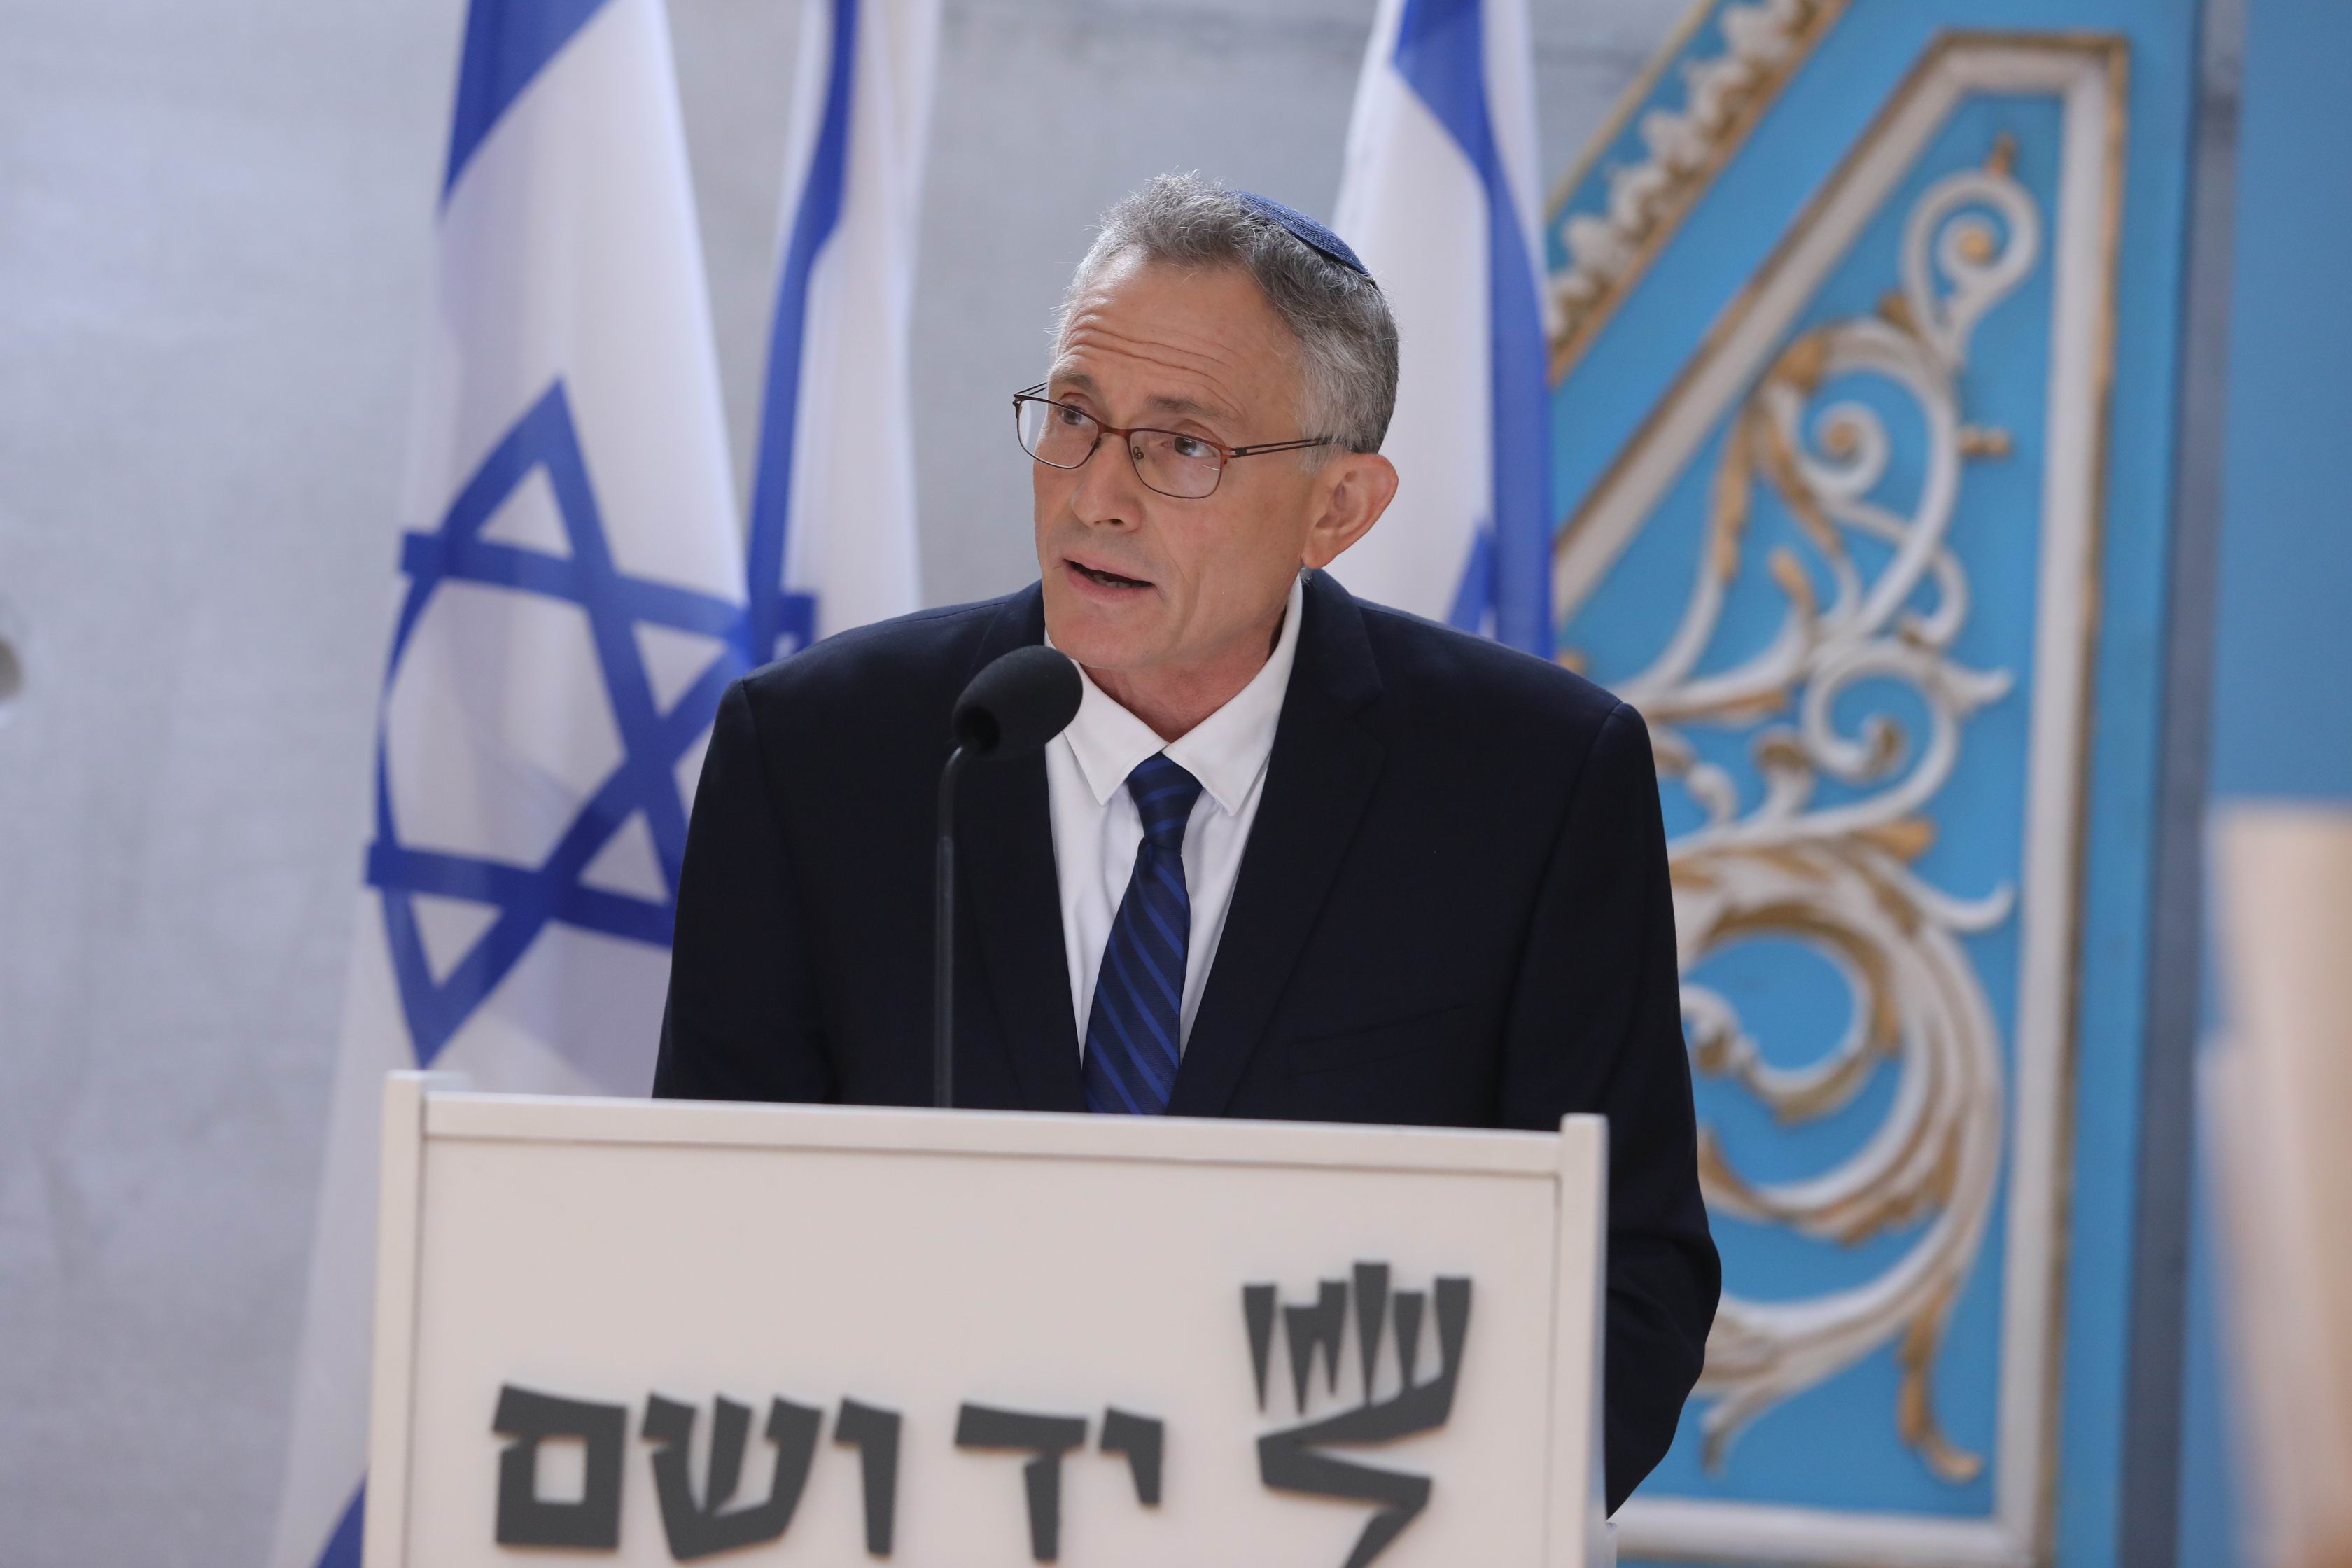 Yad Vashem's Director of Government and External Affairs Yossi Gevir opened the event marking the 75th anniversary of the revolt at Sobibor